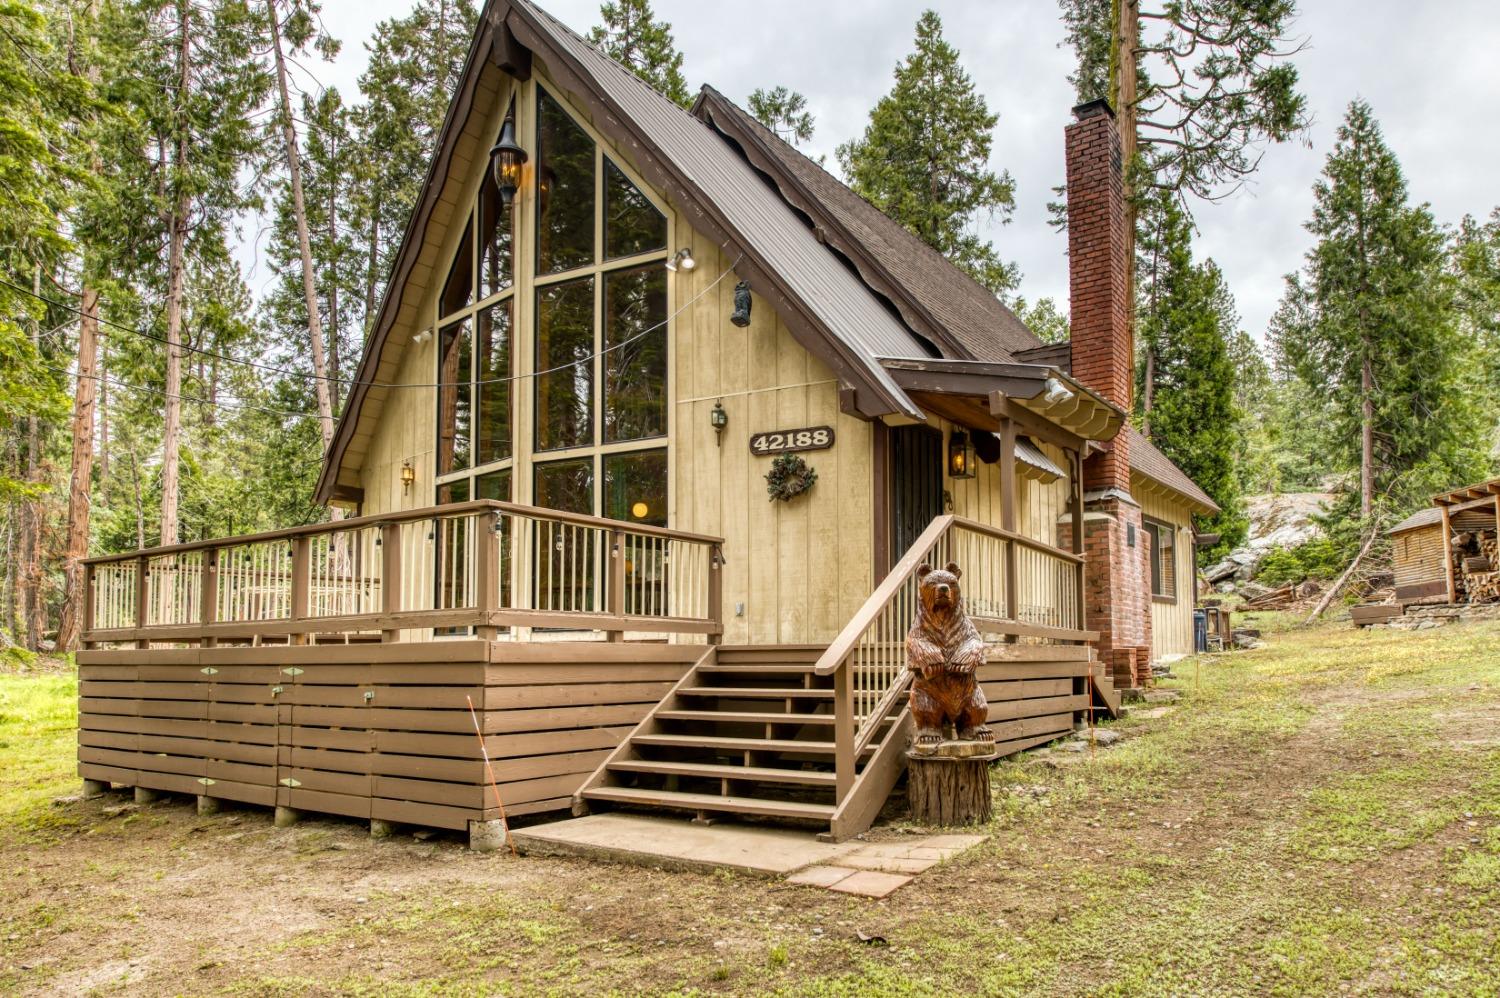 Located on a quiet cul-de-sac in Shaver Lake's popular Sierra Cedars subdivision, this wonderful 3bed/1.5bath mountain cabin offers lots of privacy and level land to enjoy the beautiful forest/meadow setting. More info to come....